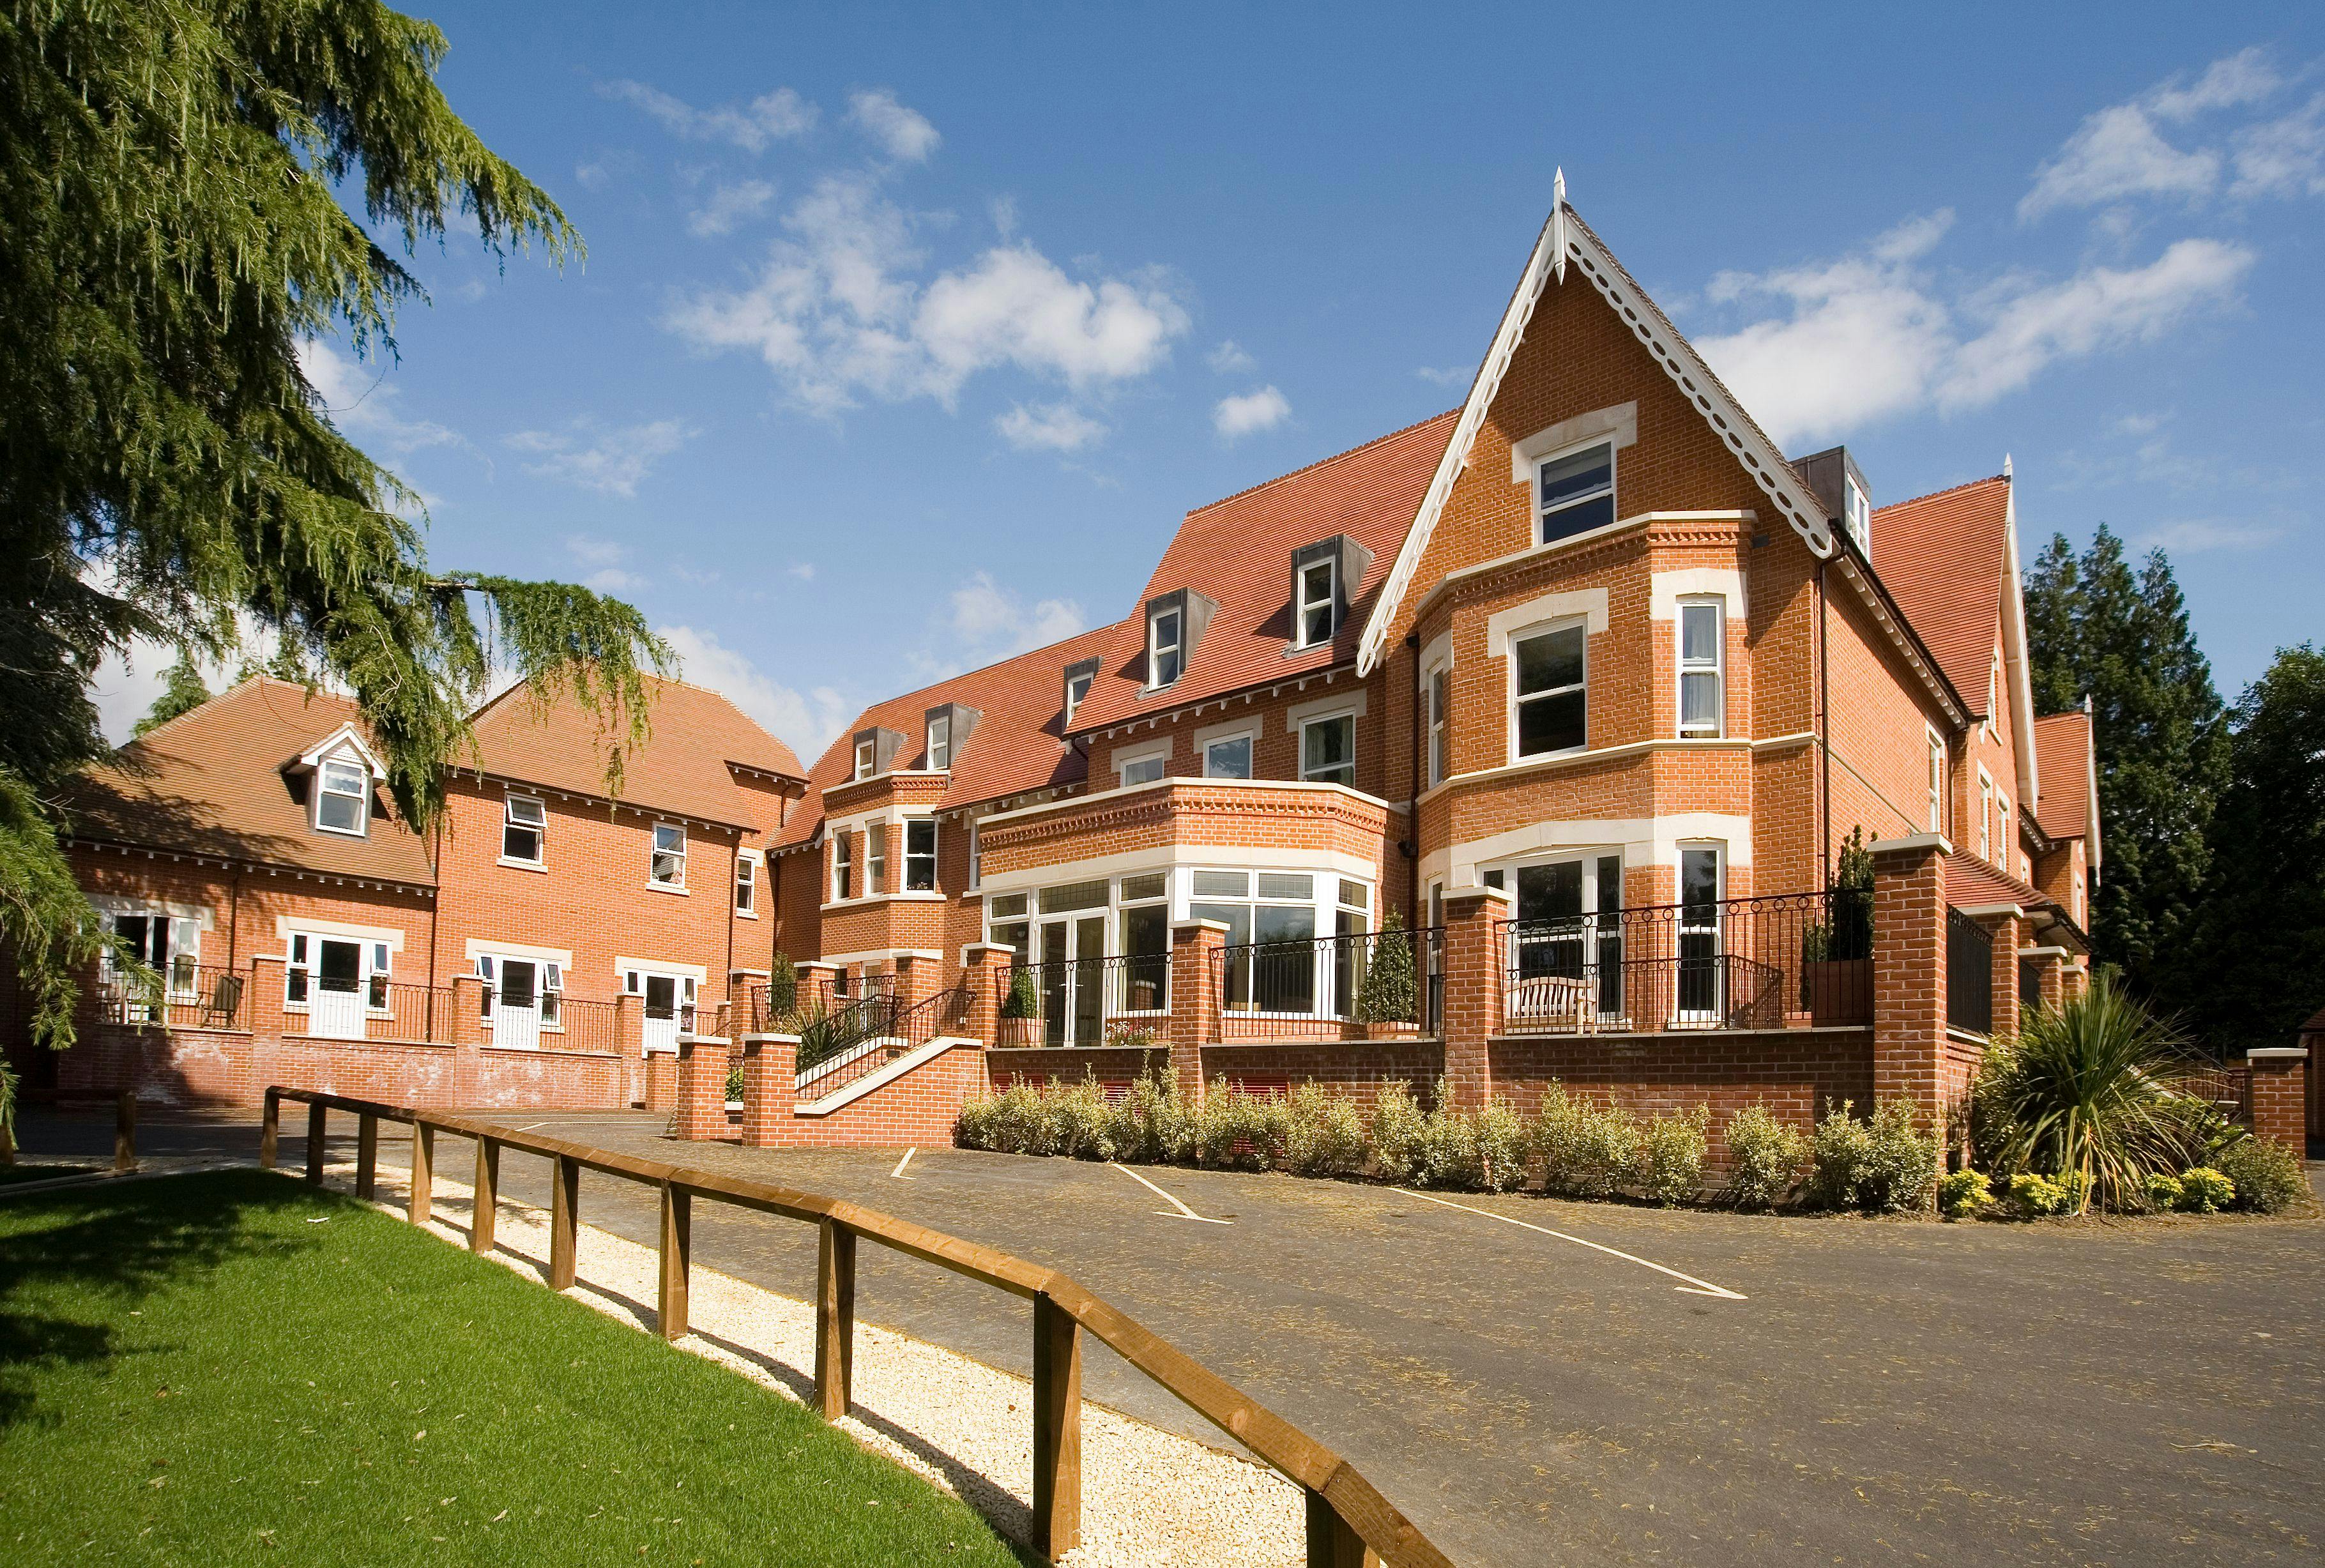 Exterior of Branksome Park care home in Poole, Dorset